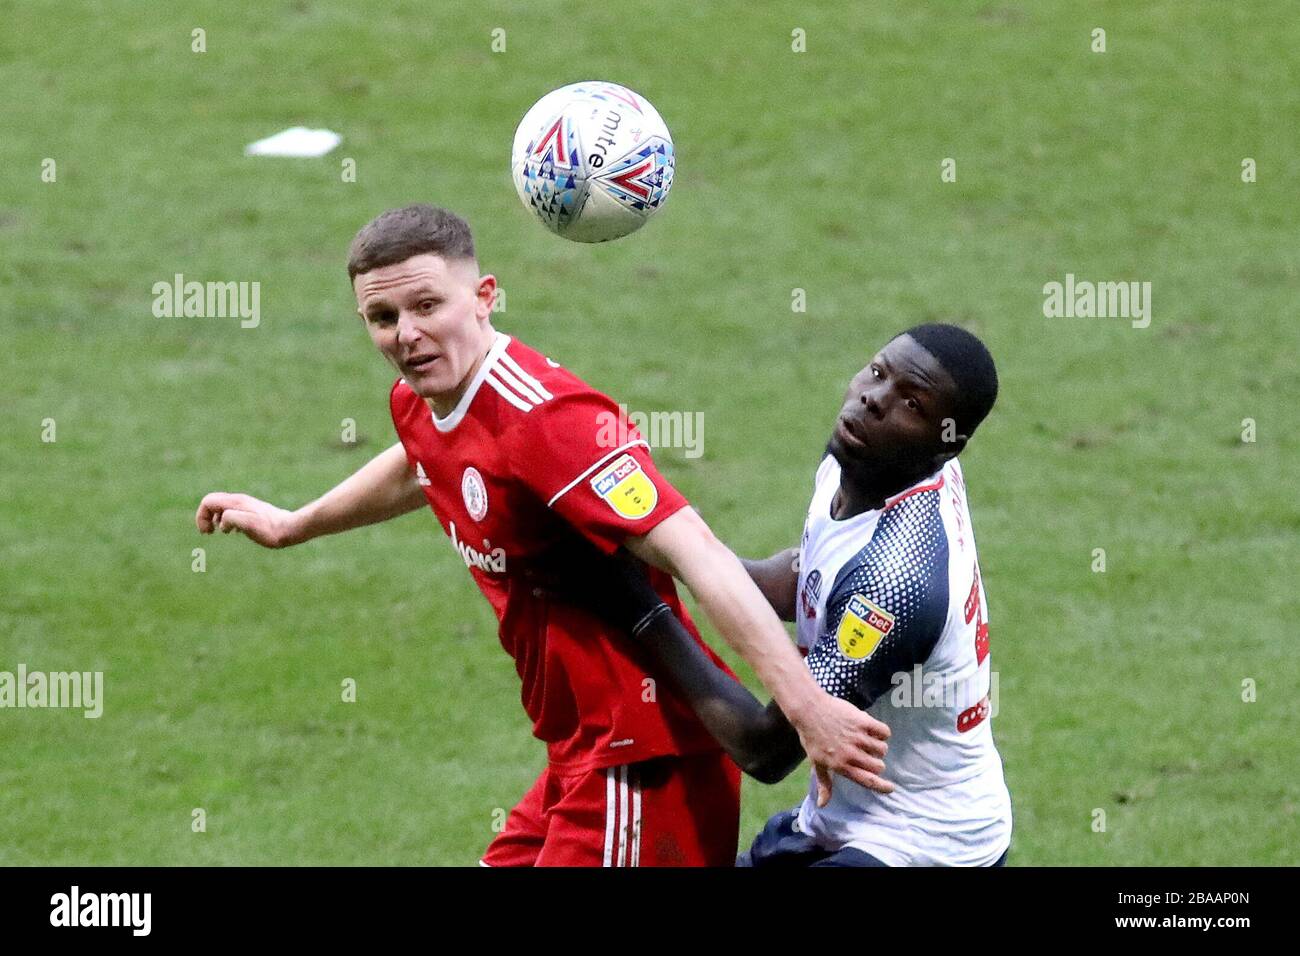 Bolton Wanderers' Yoan Zouma (right) and Accrington Stanley's Colby Bishop battle for the ball Stock Photo